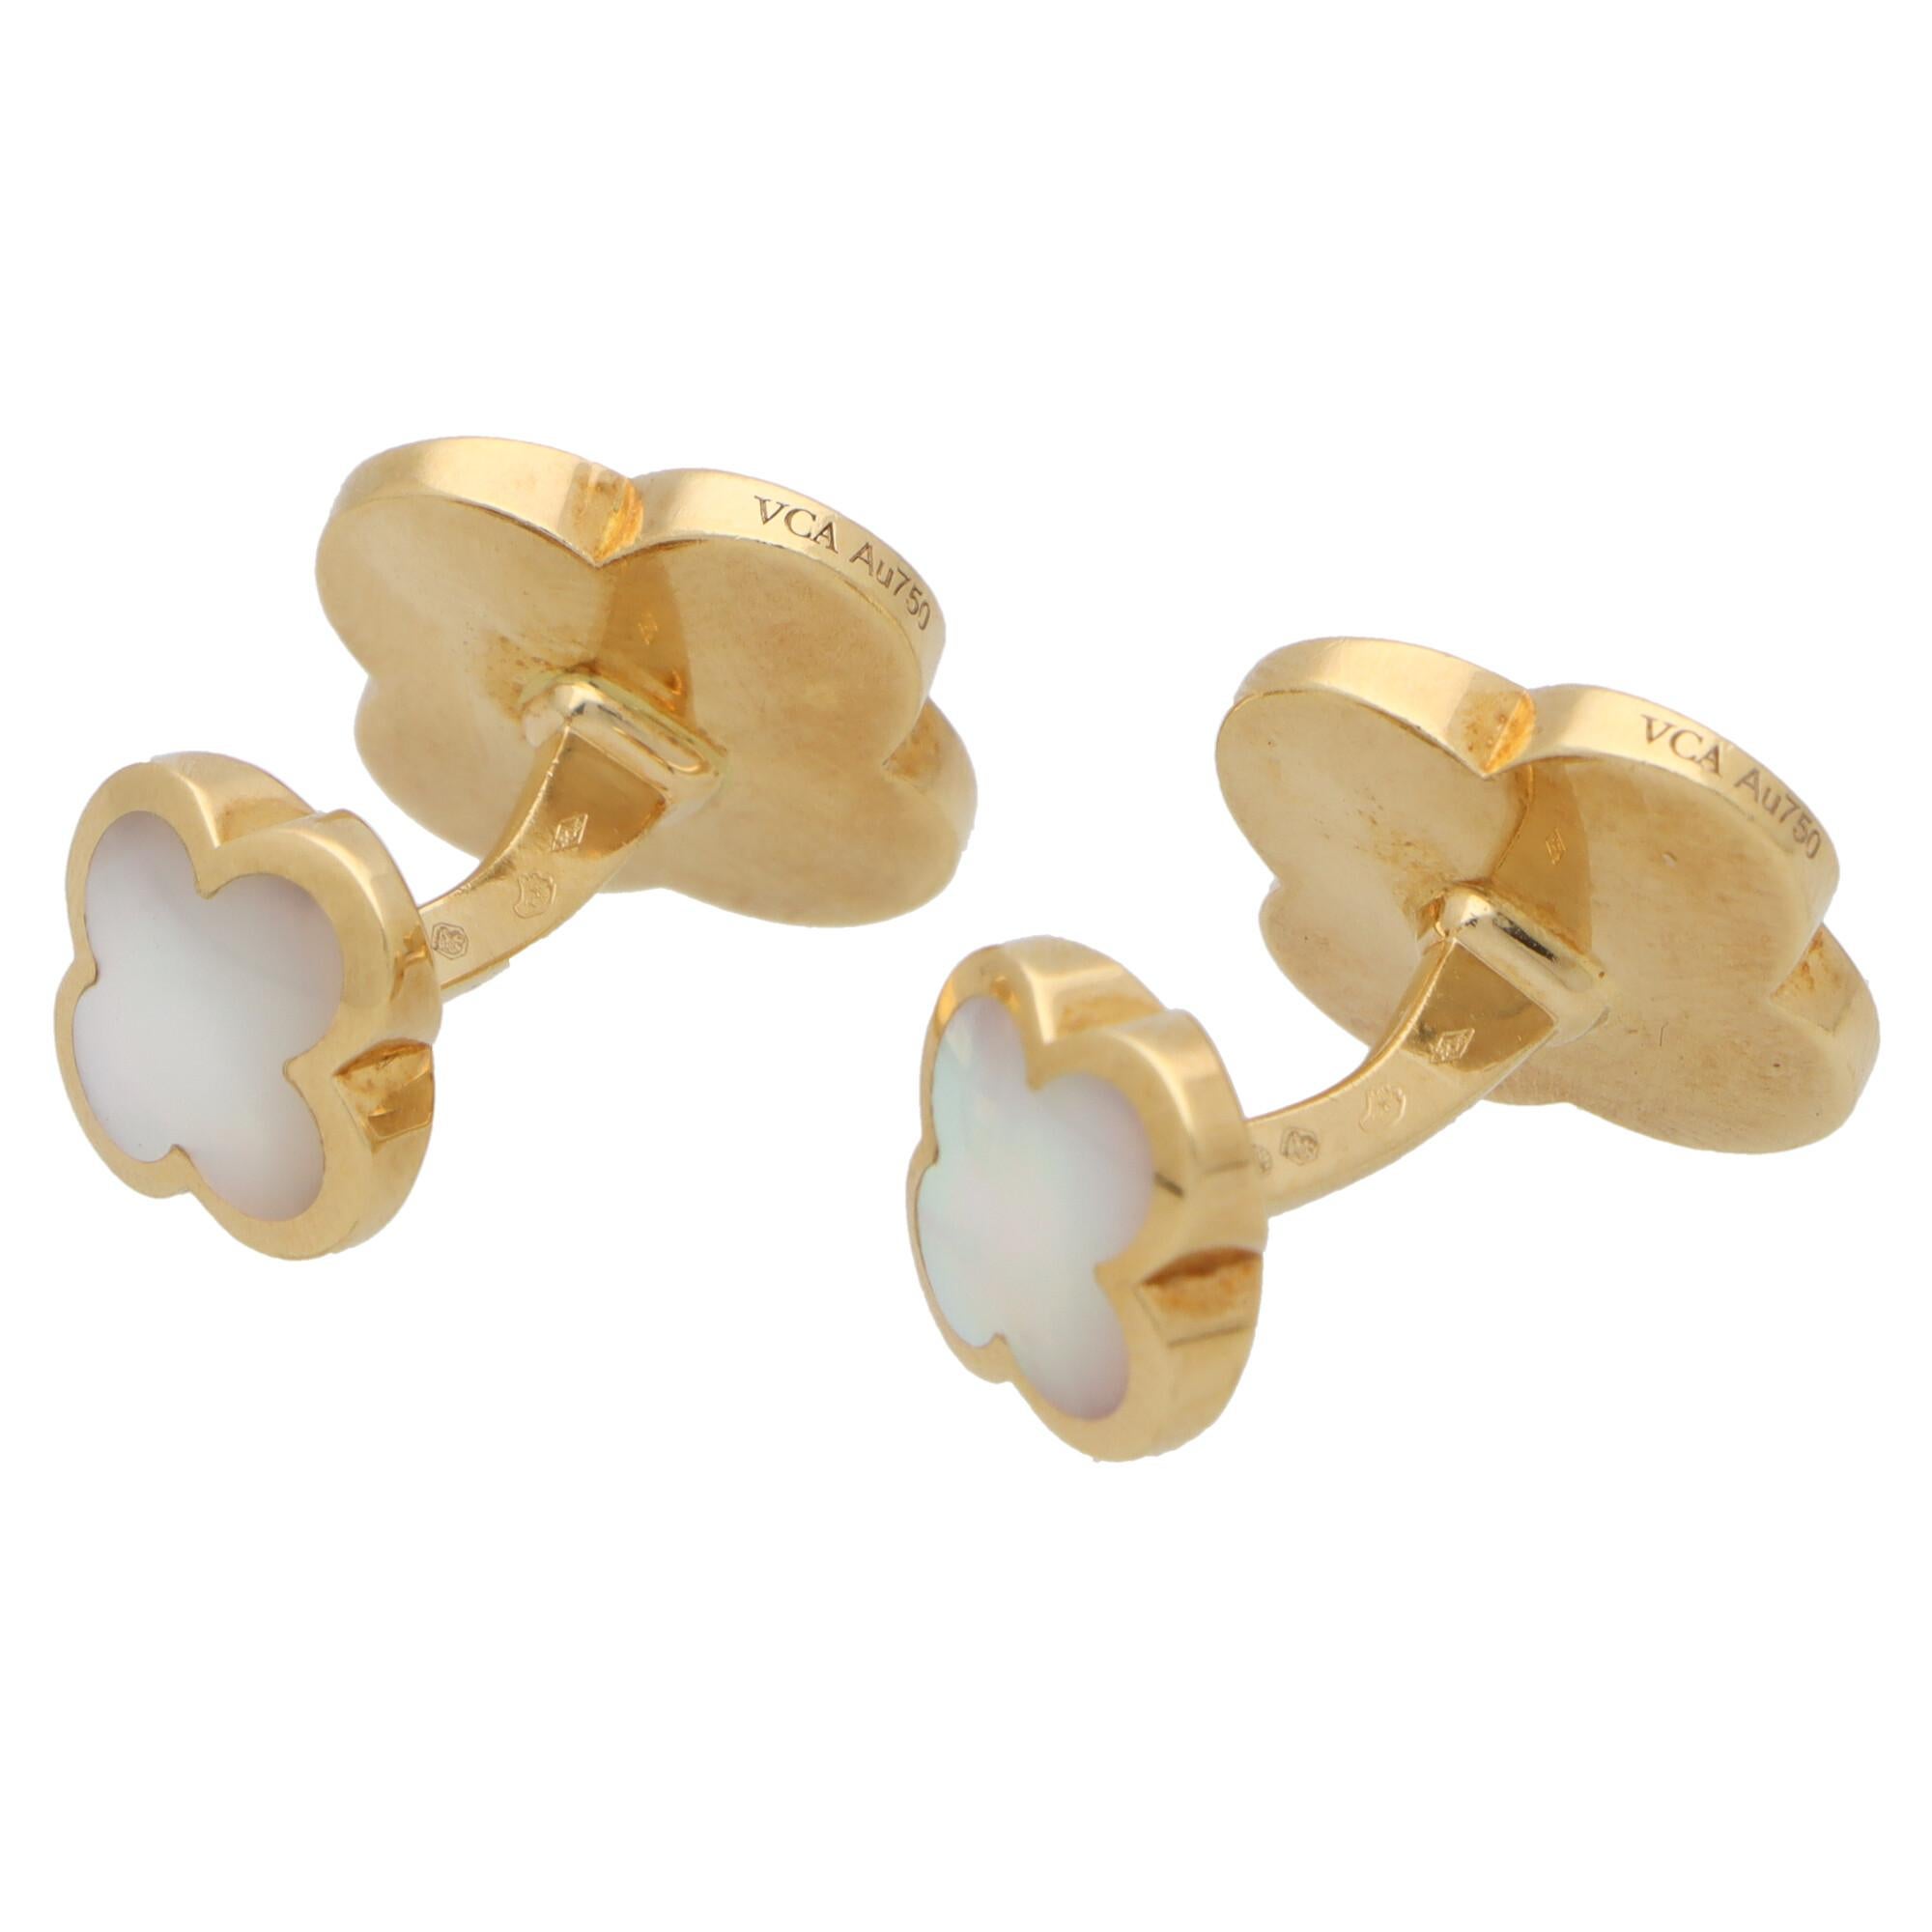 A beautiful pair of vintage Van Cleef and Arpels Alhambra swivel back cufflinks set in 18k yellow gold.

Each cufflink depicts the iconic Alhambra clover motif set centrally with a lustrous white mother of pearl piece. The cufflinks are secured to